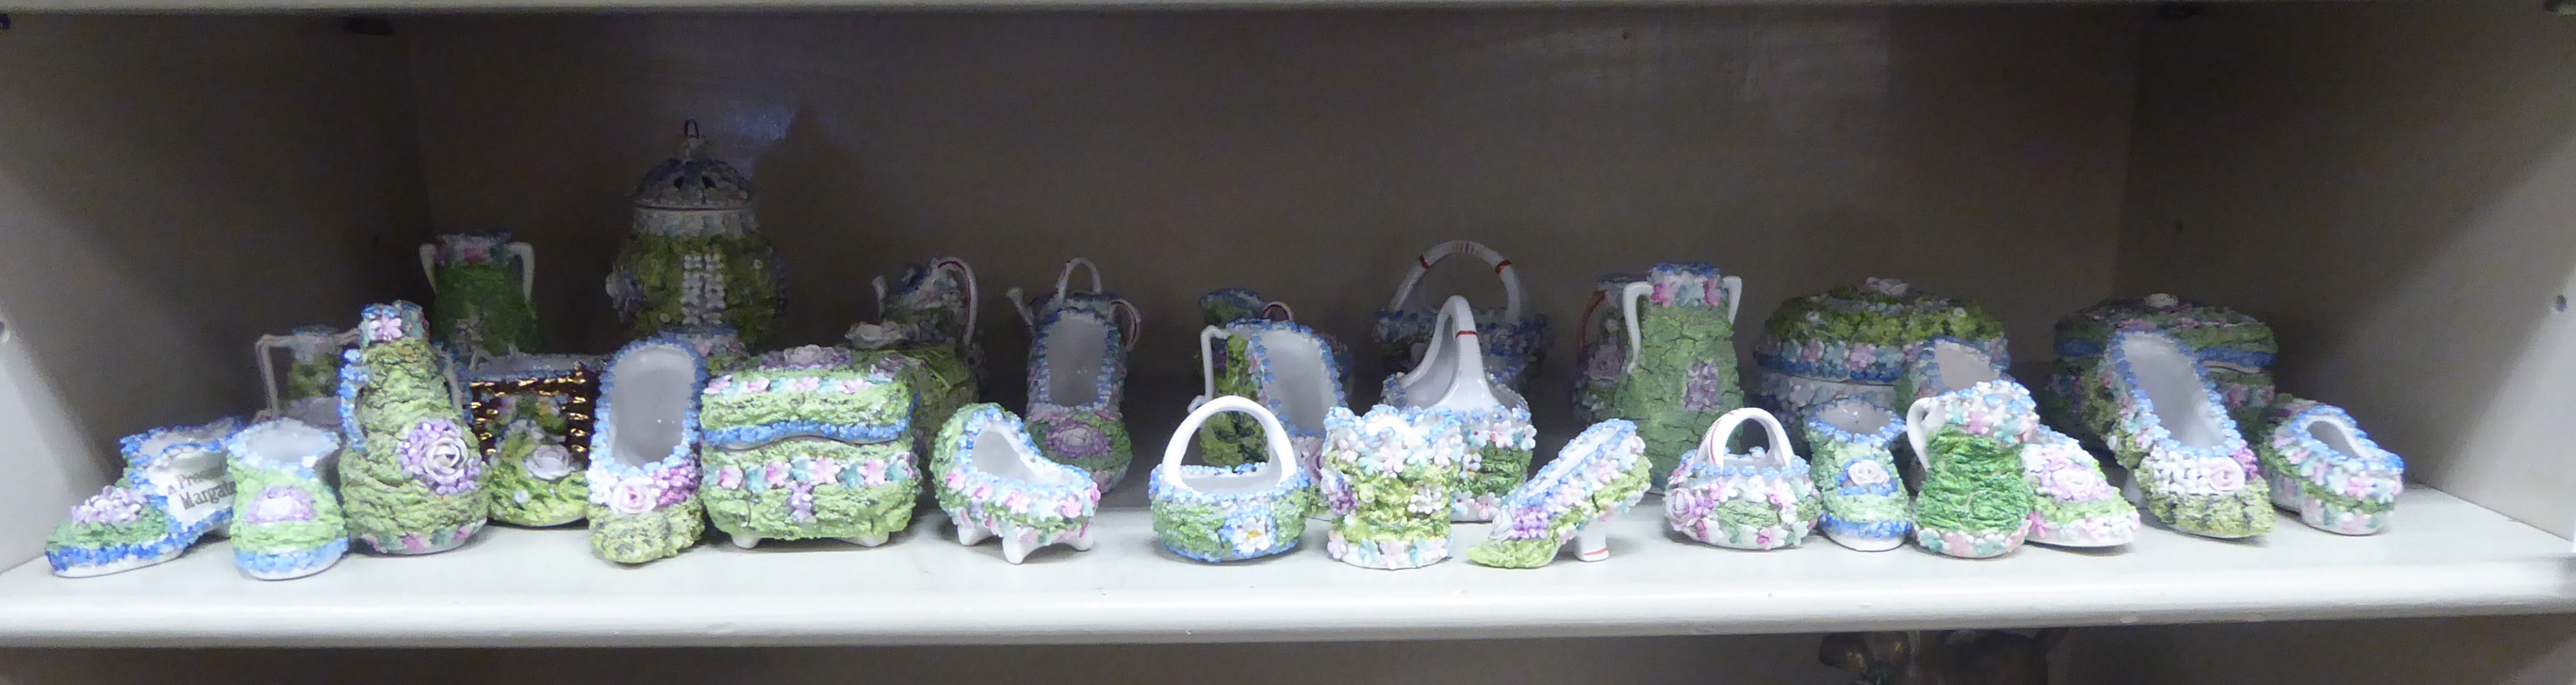 Continental porcelain vases, model shoes and ornaments,